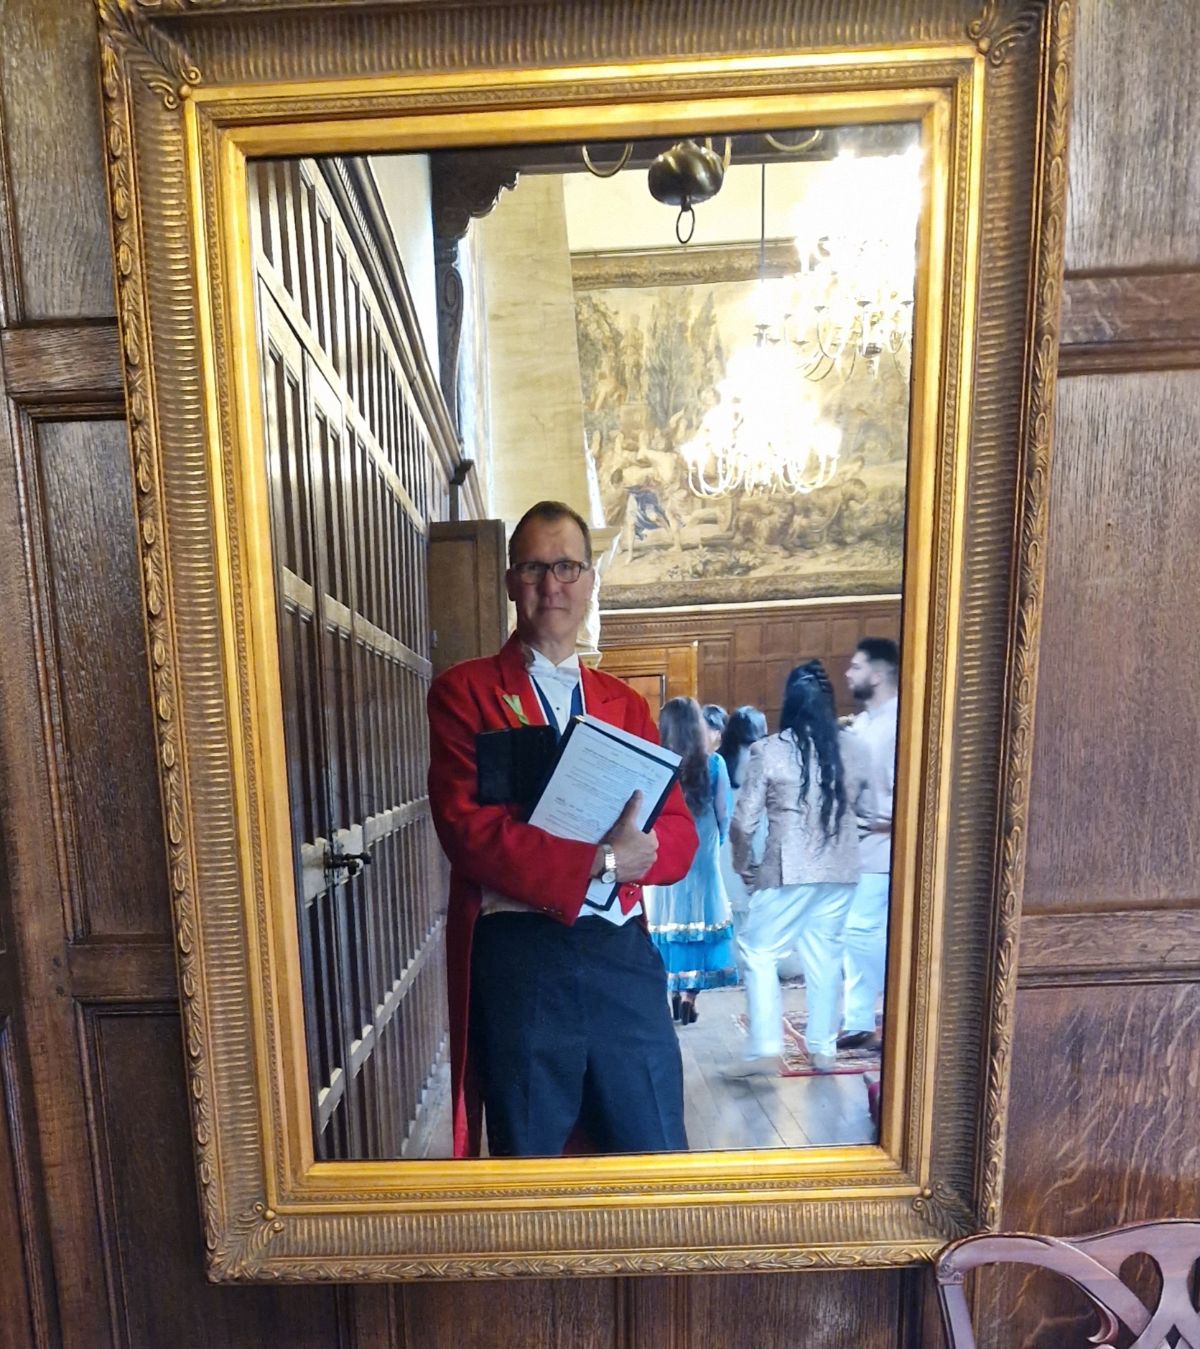 The Man in the Red Coat - Toastmaster James Hasler-Image-8